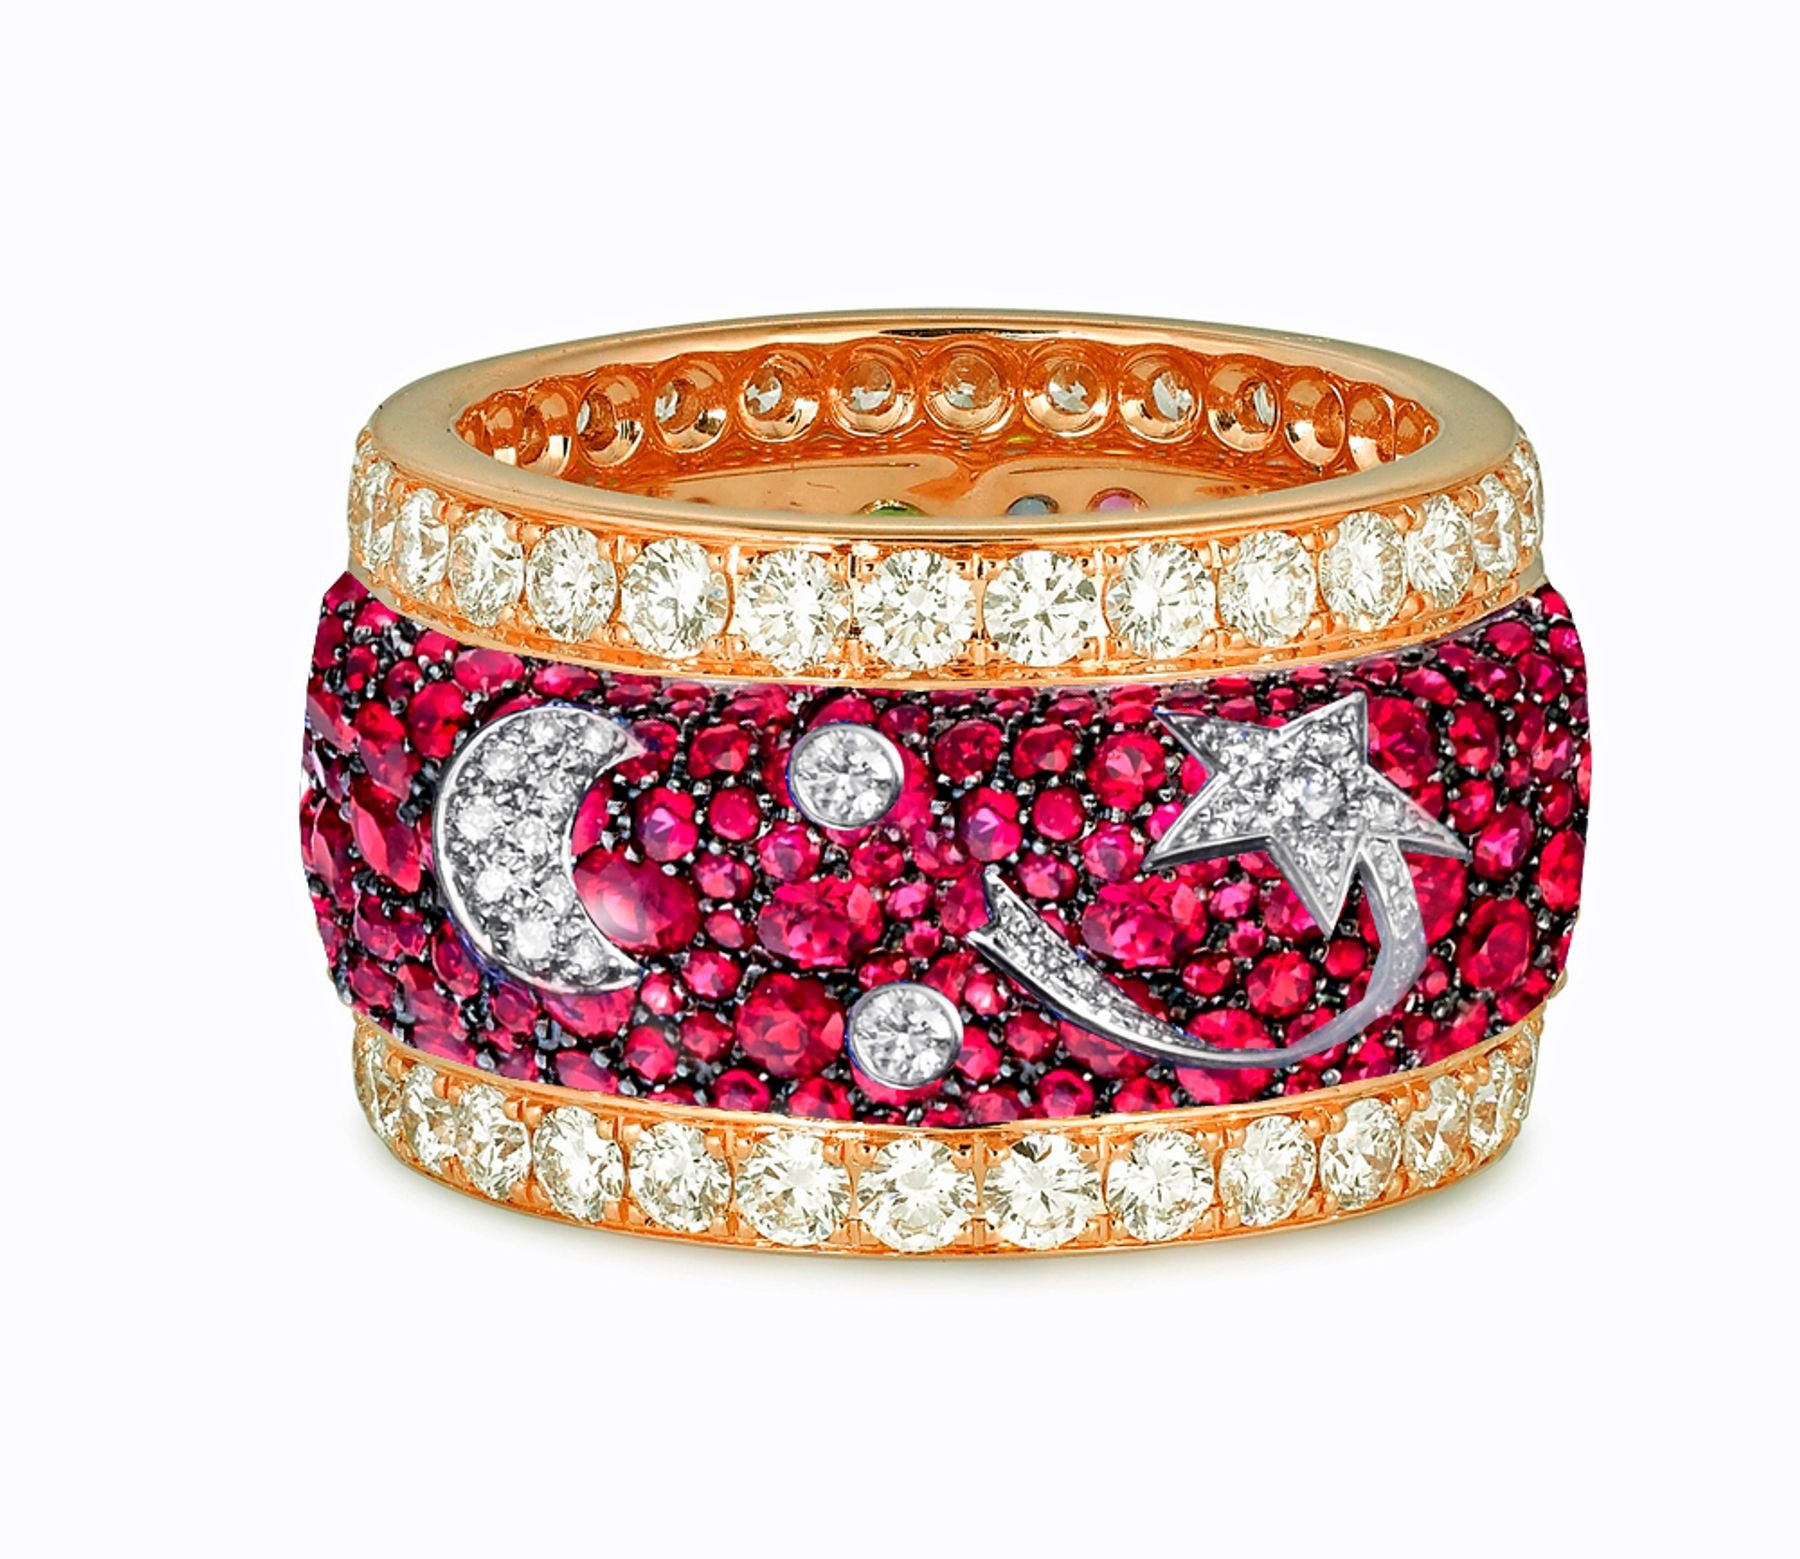 Eternity Ring with Pave Set Rubies & White Diamonds in Gold or Platinum